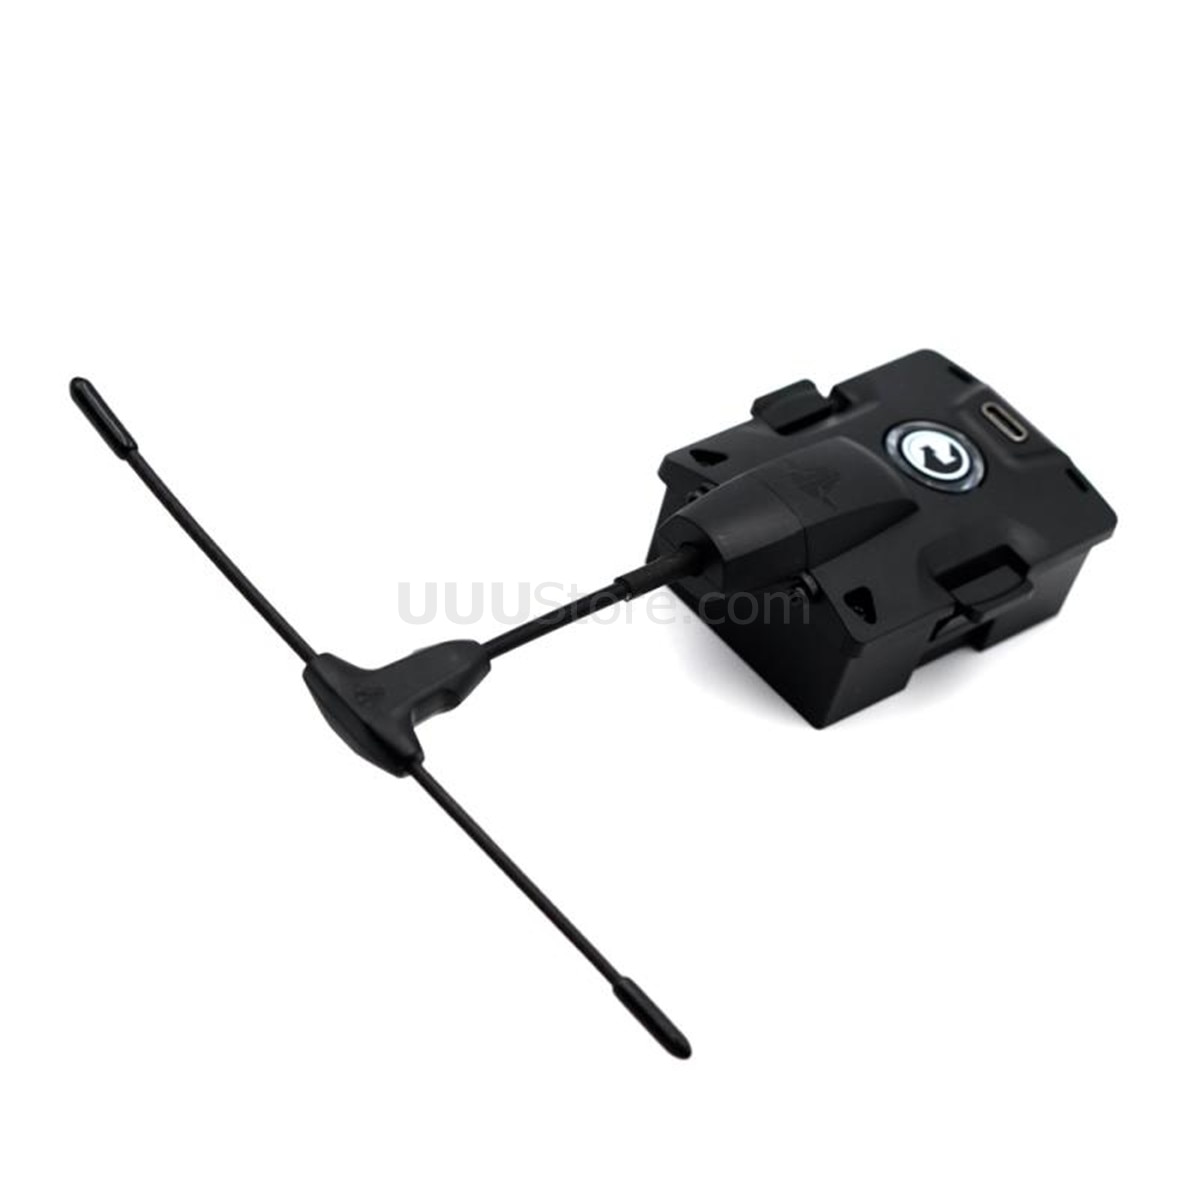 TBS Crossfire Micro Transmitter 915/868Mhz V2 RC Drone